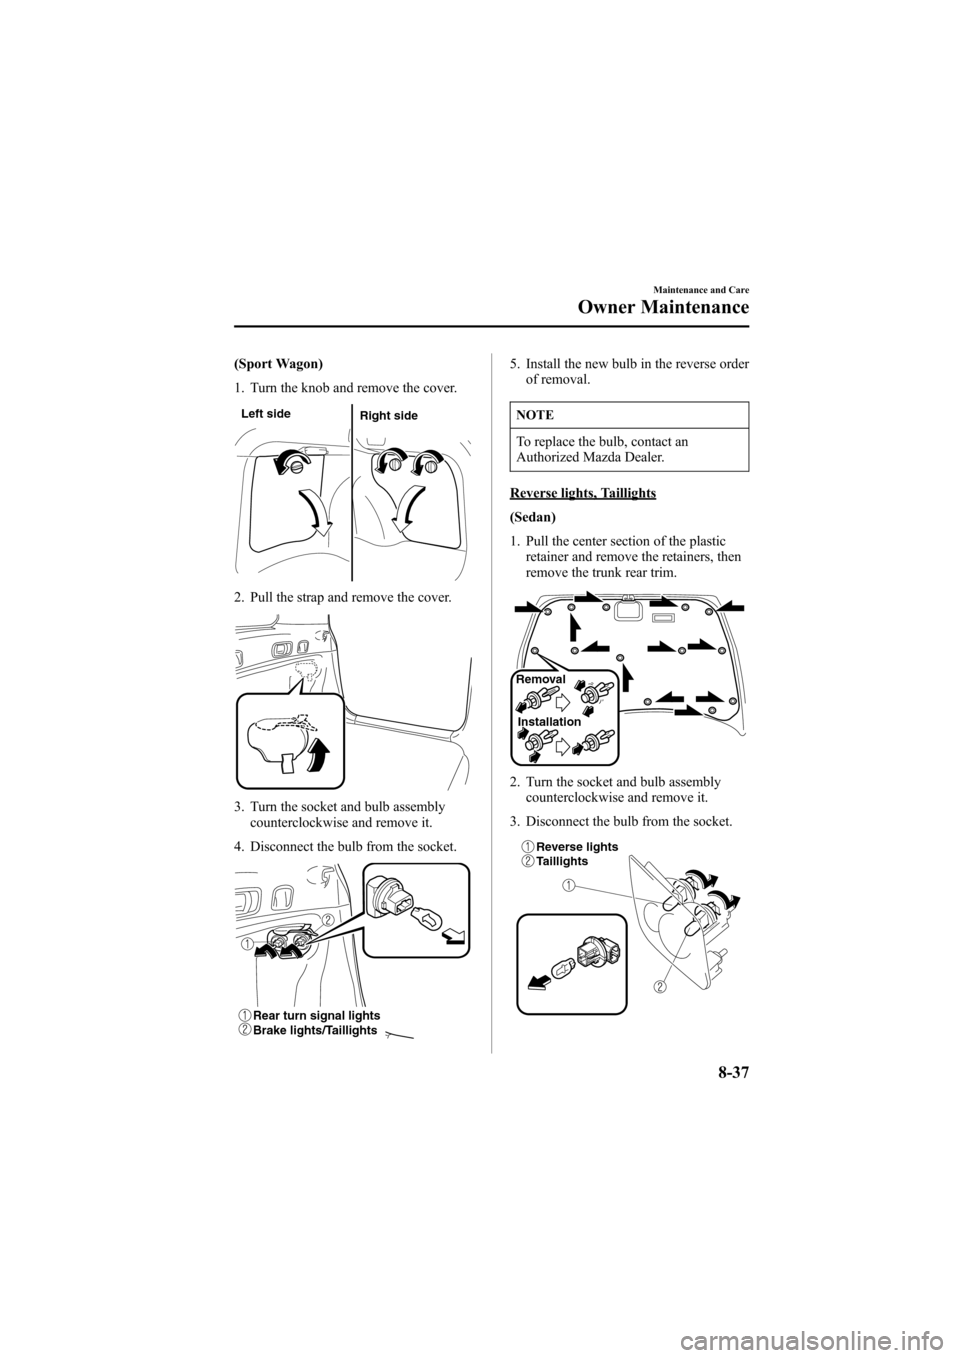 MAZDA MODEL 6 2005  Owners Manual (in English) Black plate (287,1)
(Sport Wagon)
1. Turn the knob and remove the cover.
Left side
Right side
2. Pull the strap and remove the cover.
3. Turn the socket and bulb assembly
counterclockwise and remove i